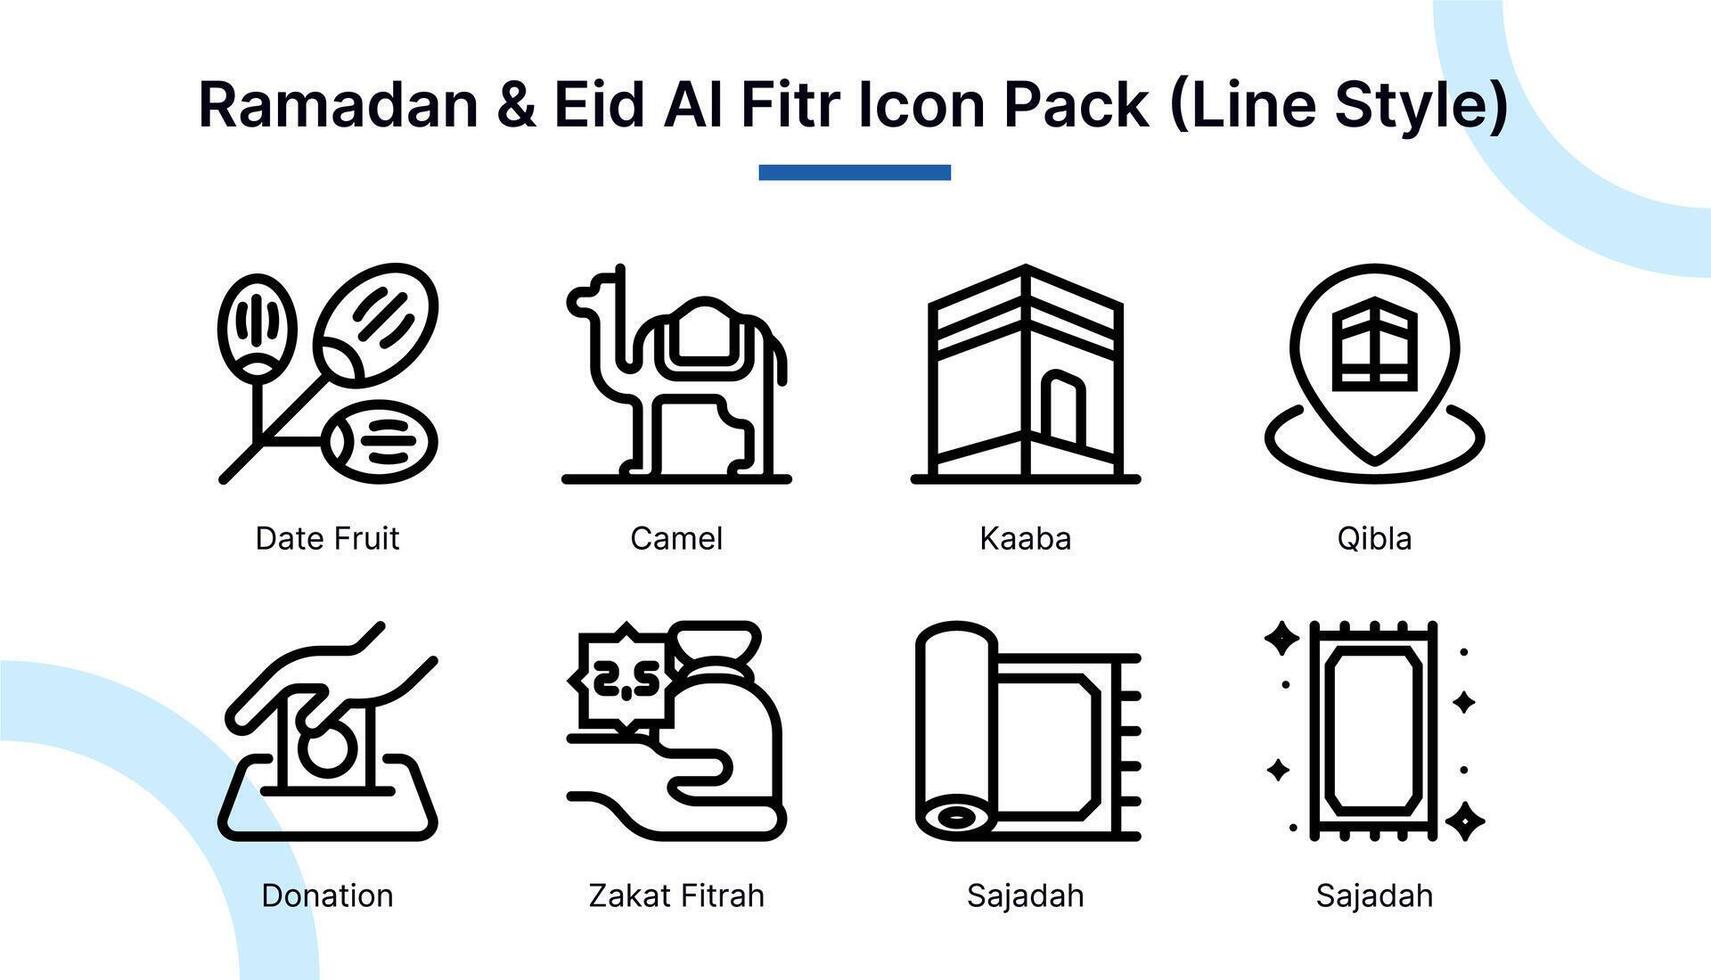 Ramadan and Eid Al Fitr  Icon Set in Line Style Suitable for web and app icons, presentations, posters, etc. vector